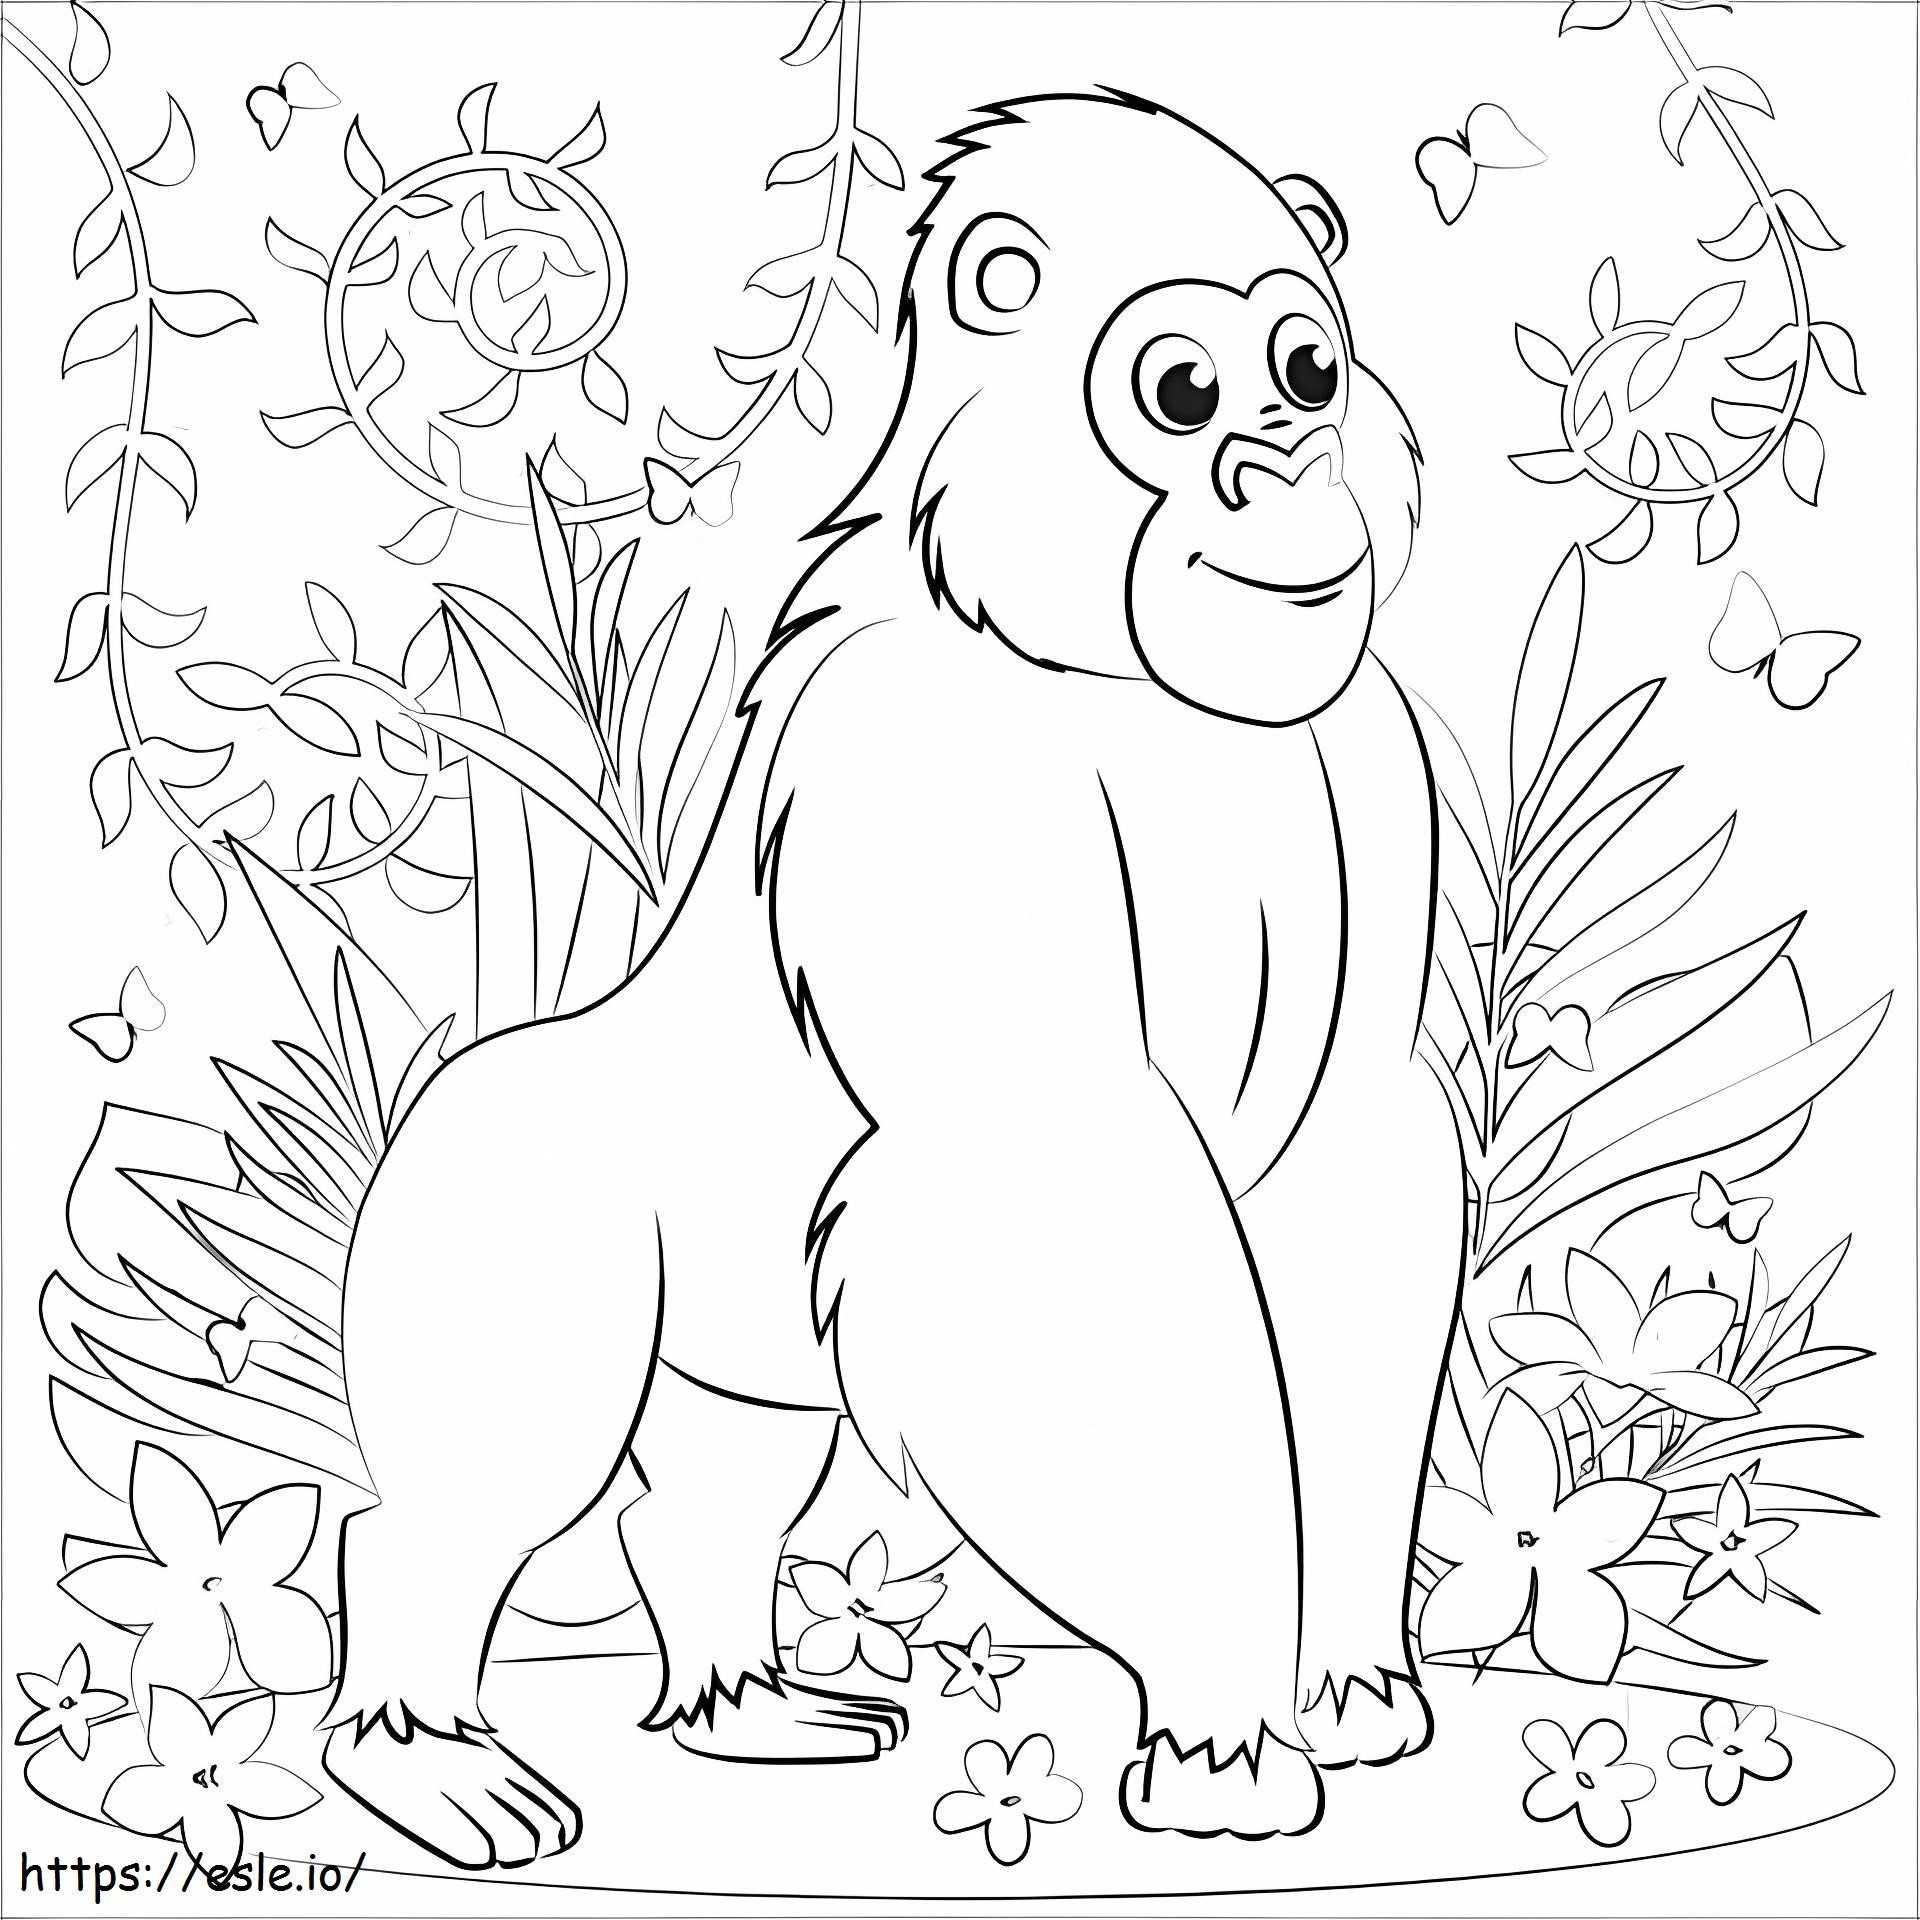 Little Gorilla Smiling coloring page